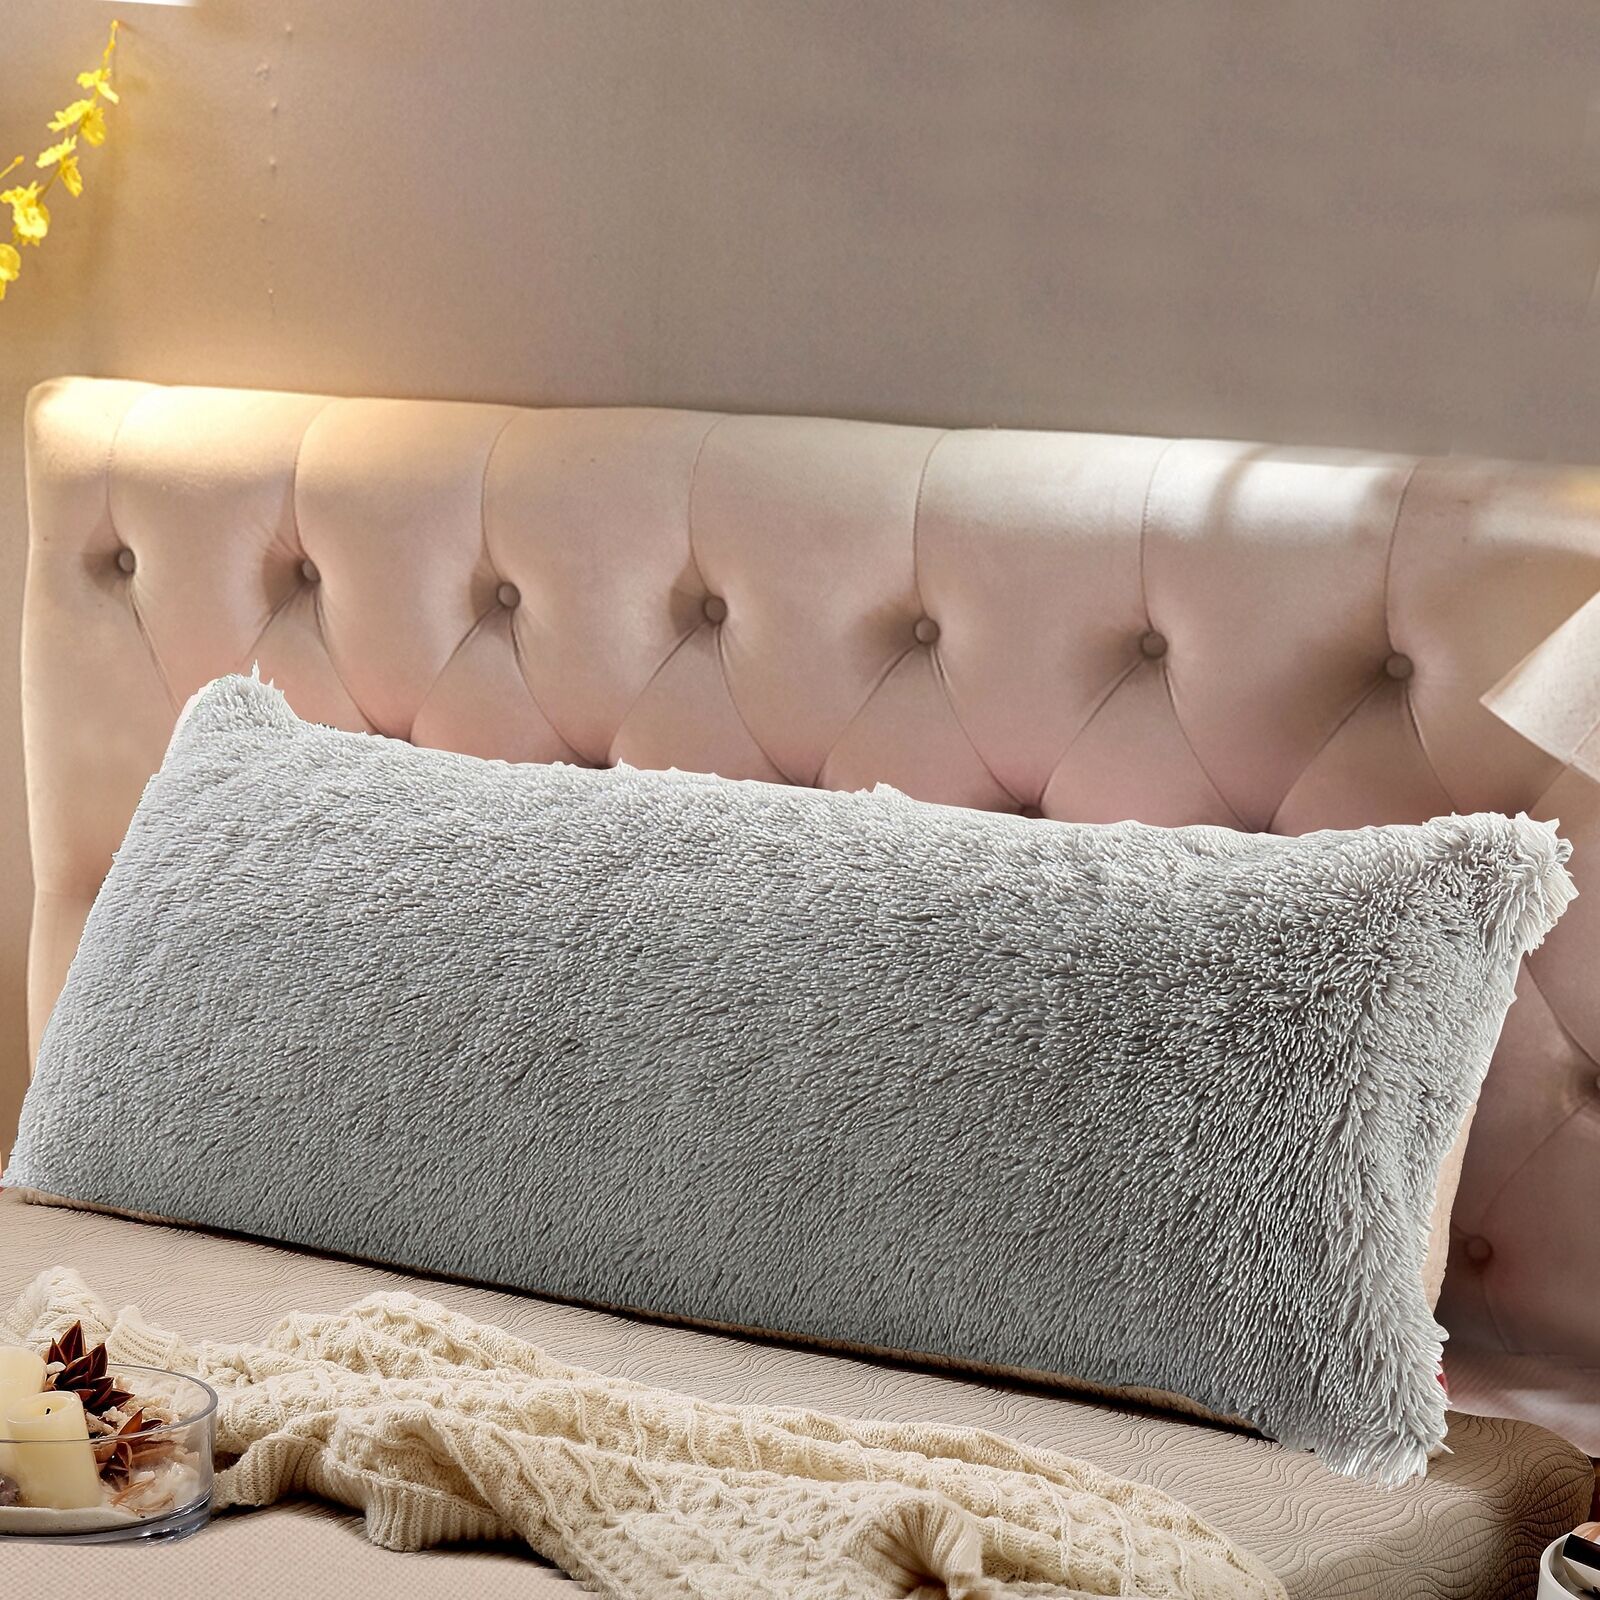 Big Pillows: Add Comfort and Style to Your Living Space with Plush Big Pillows